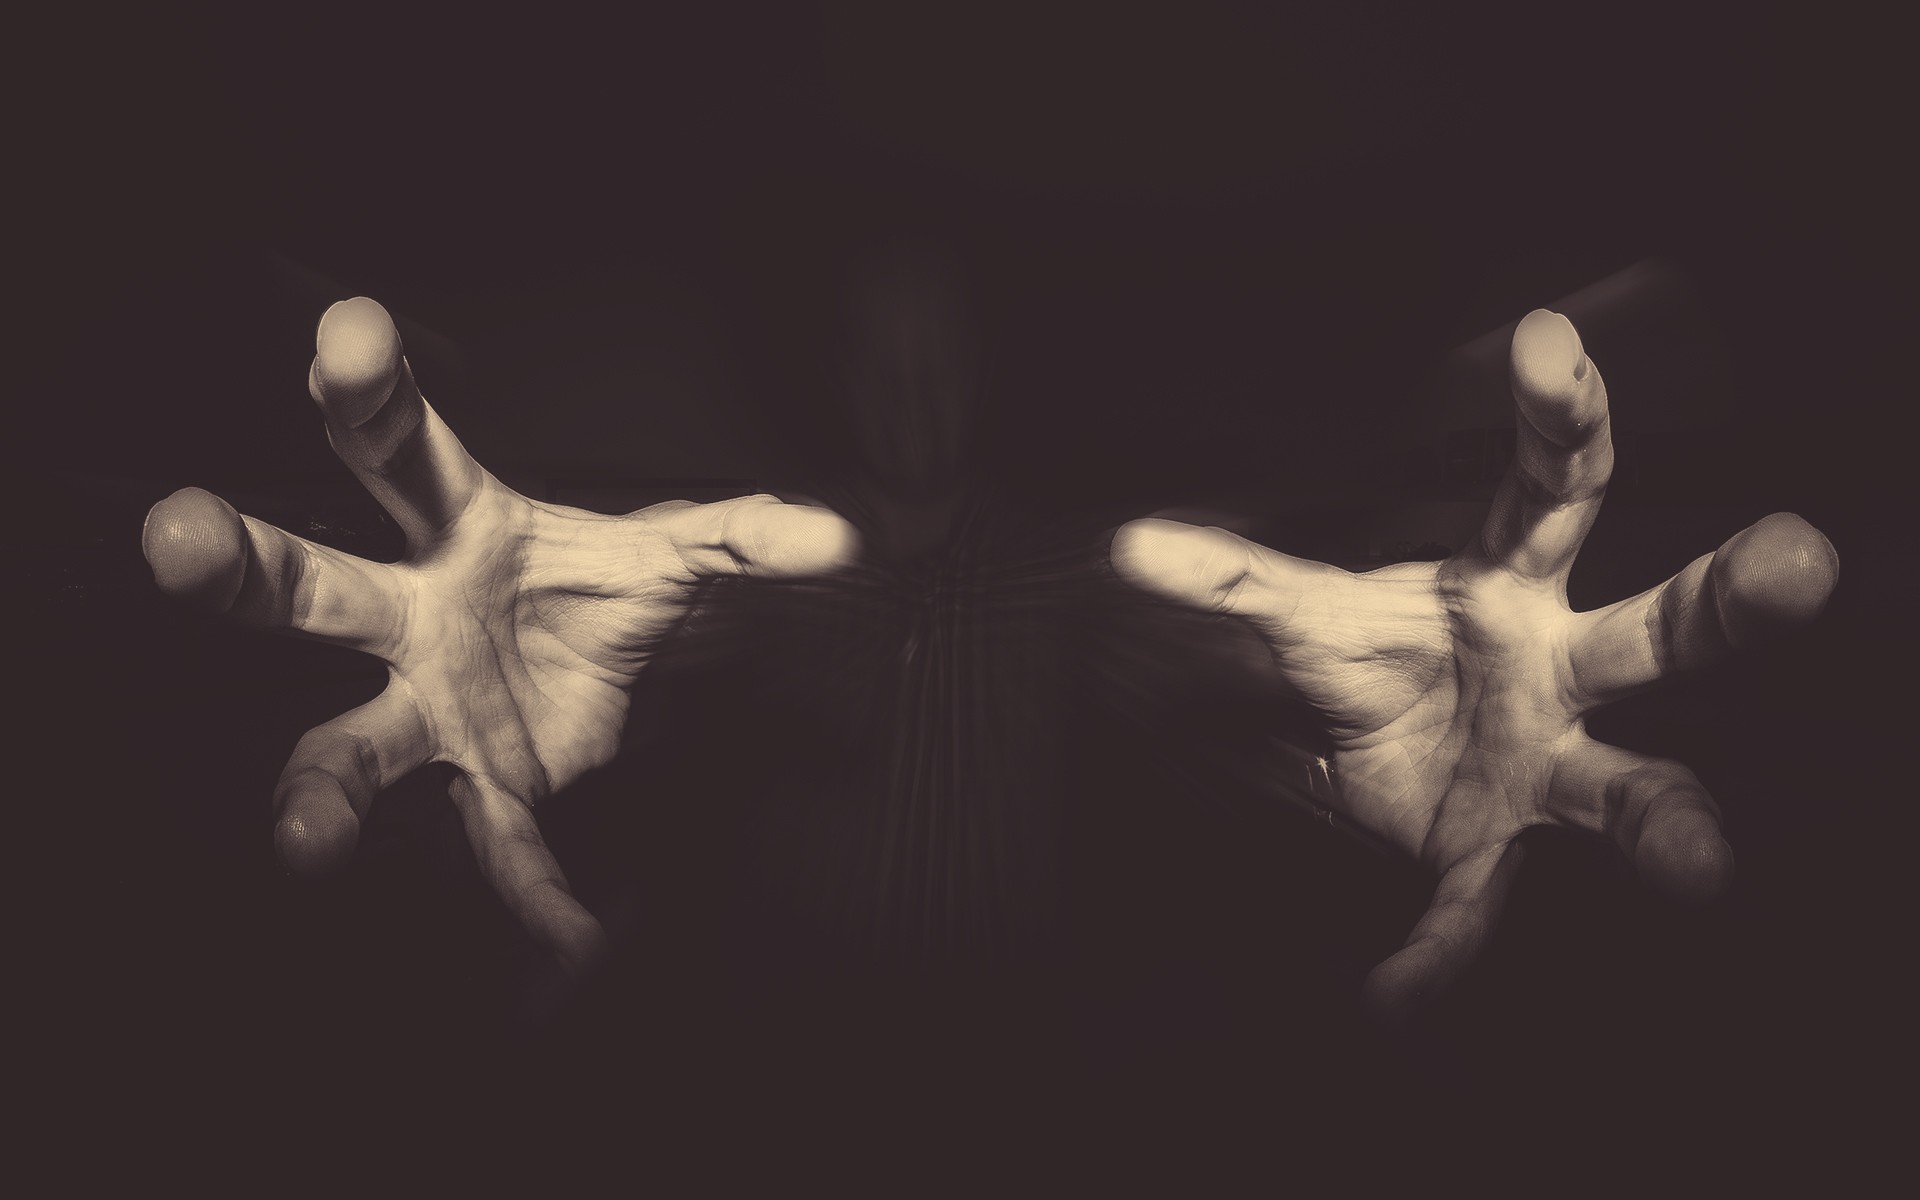 Hands Reaching Out To Grab Hold Dark Black Wallpaper Scary Creepy